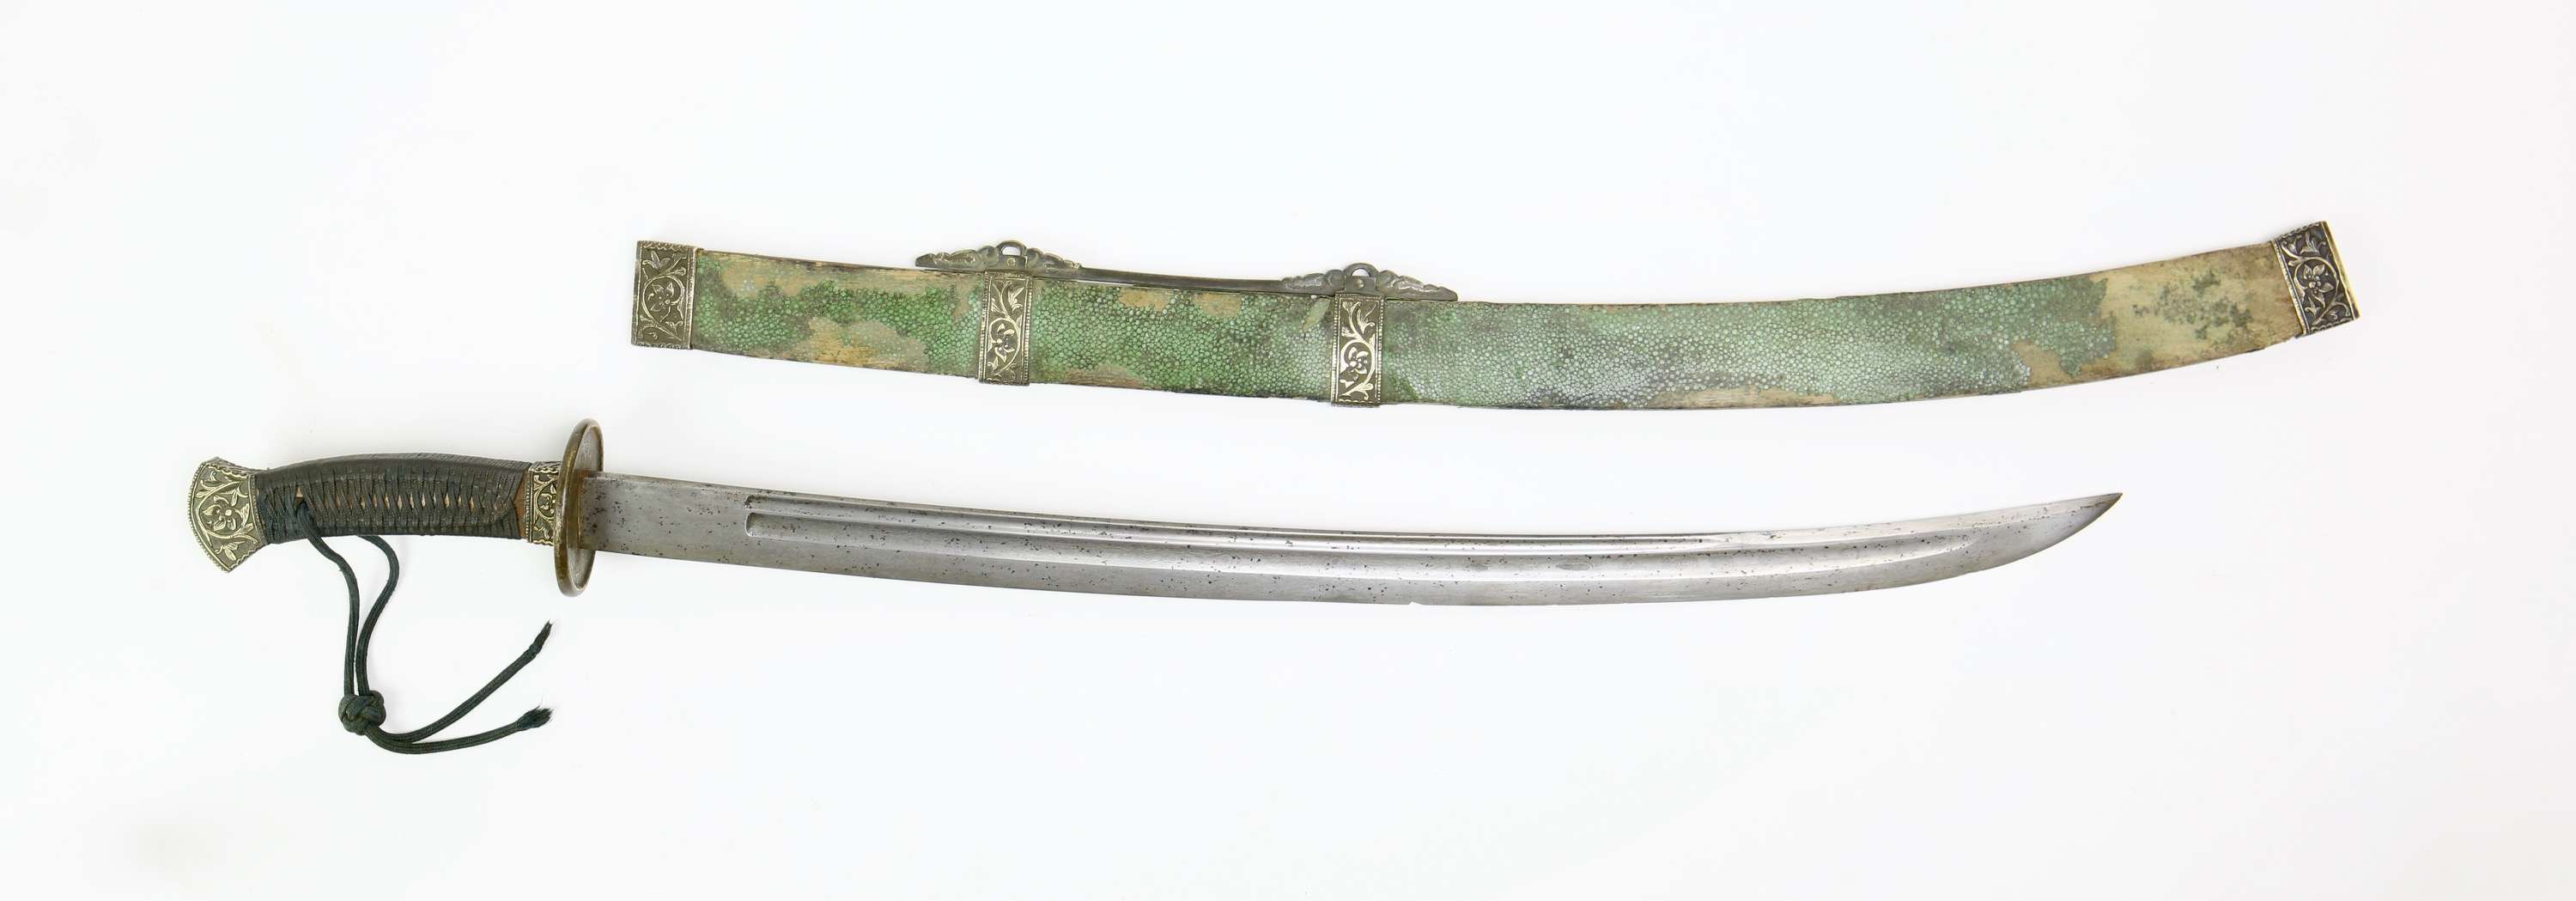 Antique Chinese officer saber in the angular style